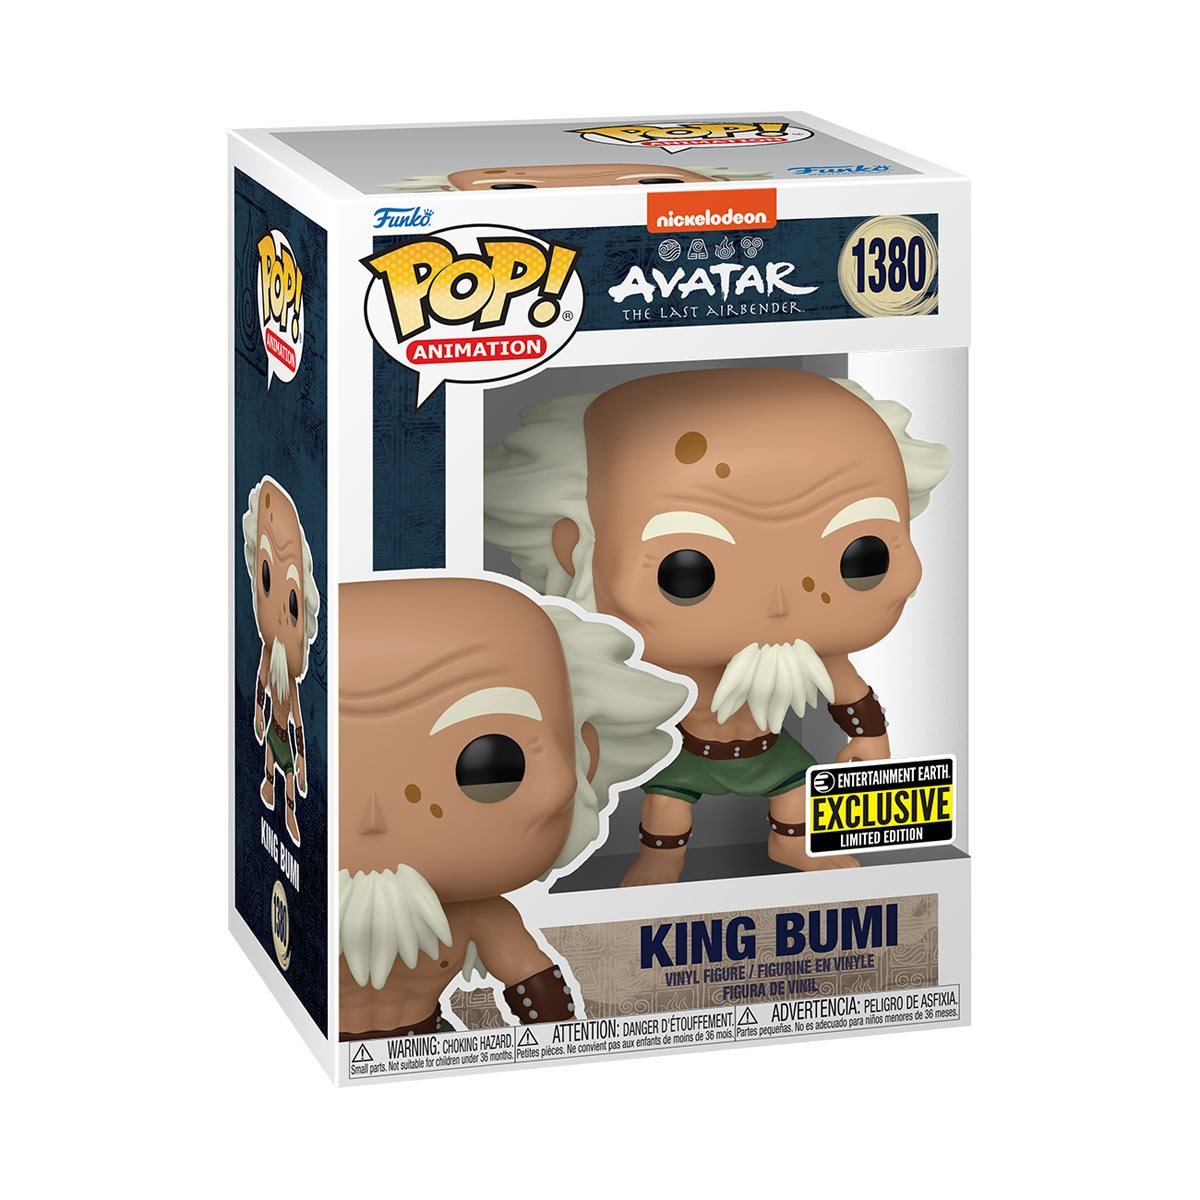 King Bumi Avatar the Last Airbender EE exclusive Pop!